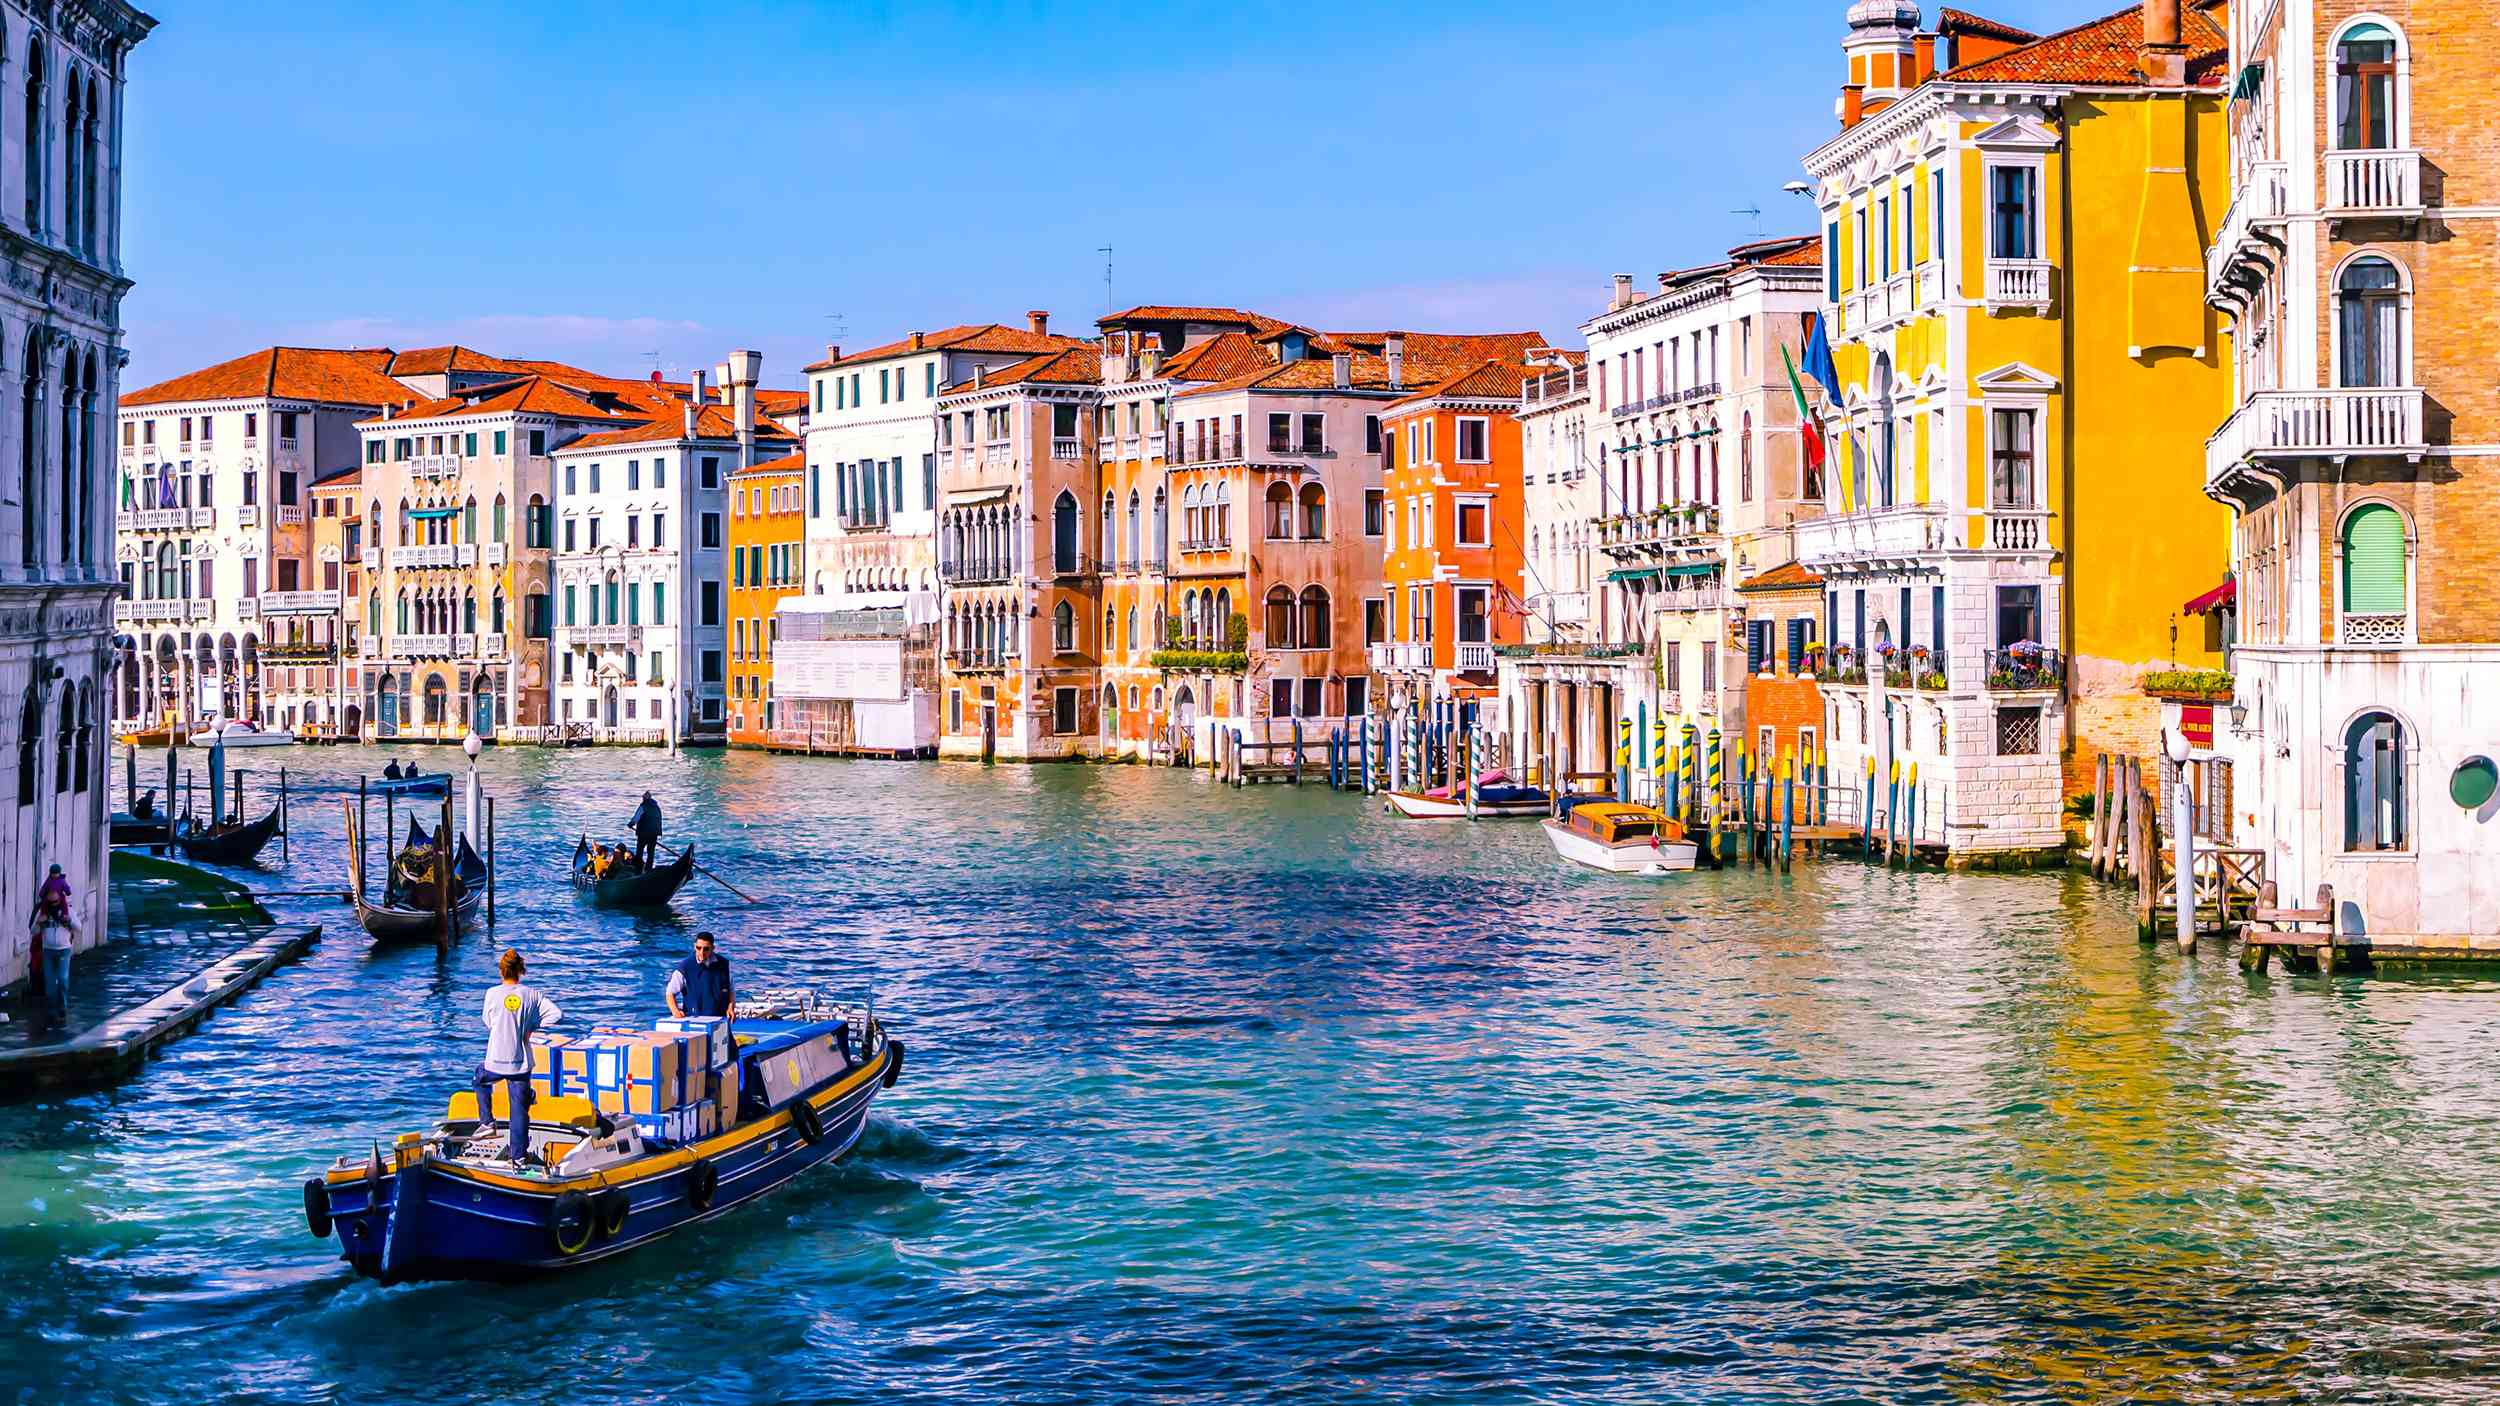 Is Venice Tap Water Safe To Drink? Tap water & safety quality